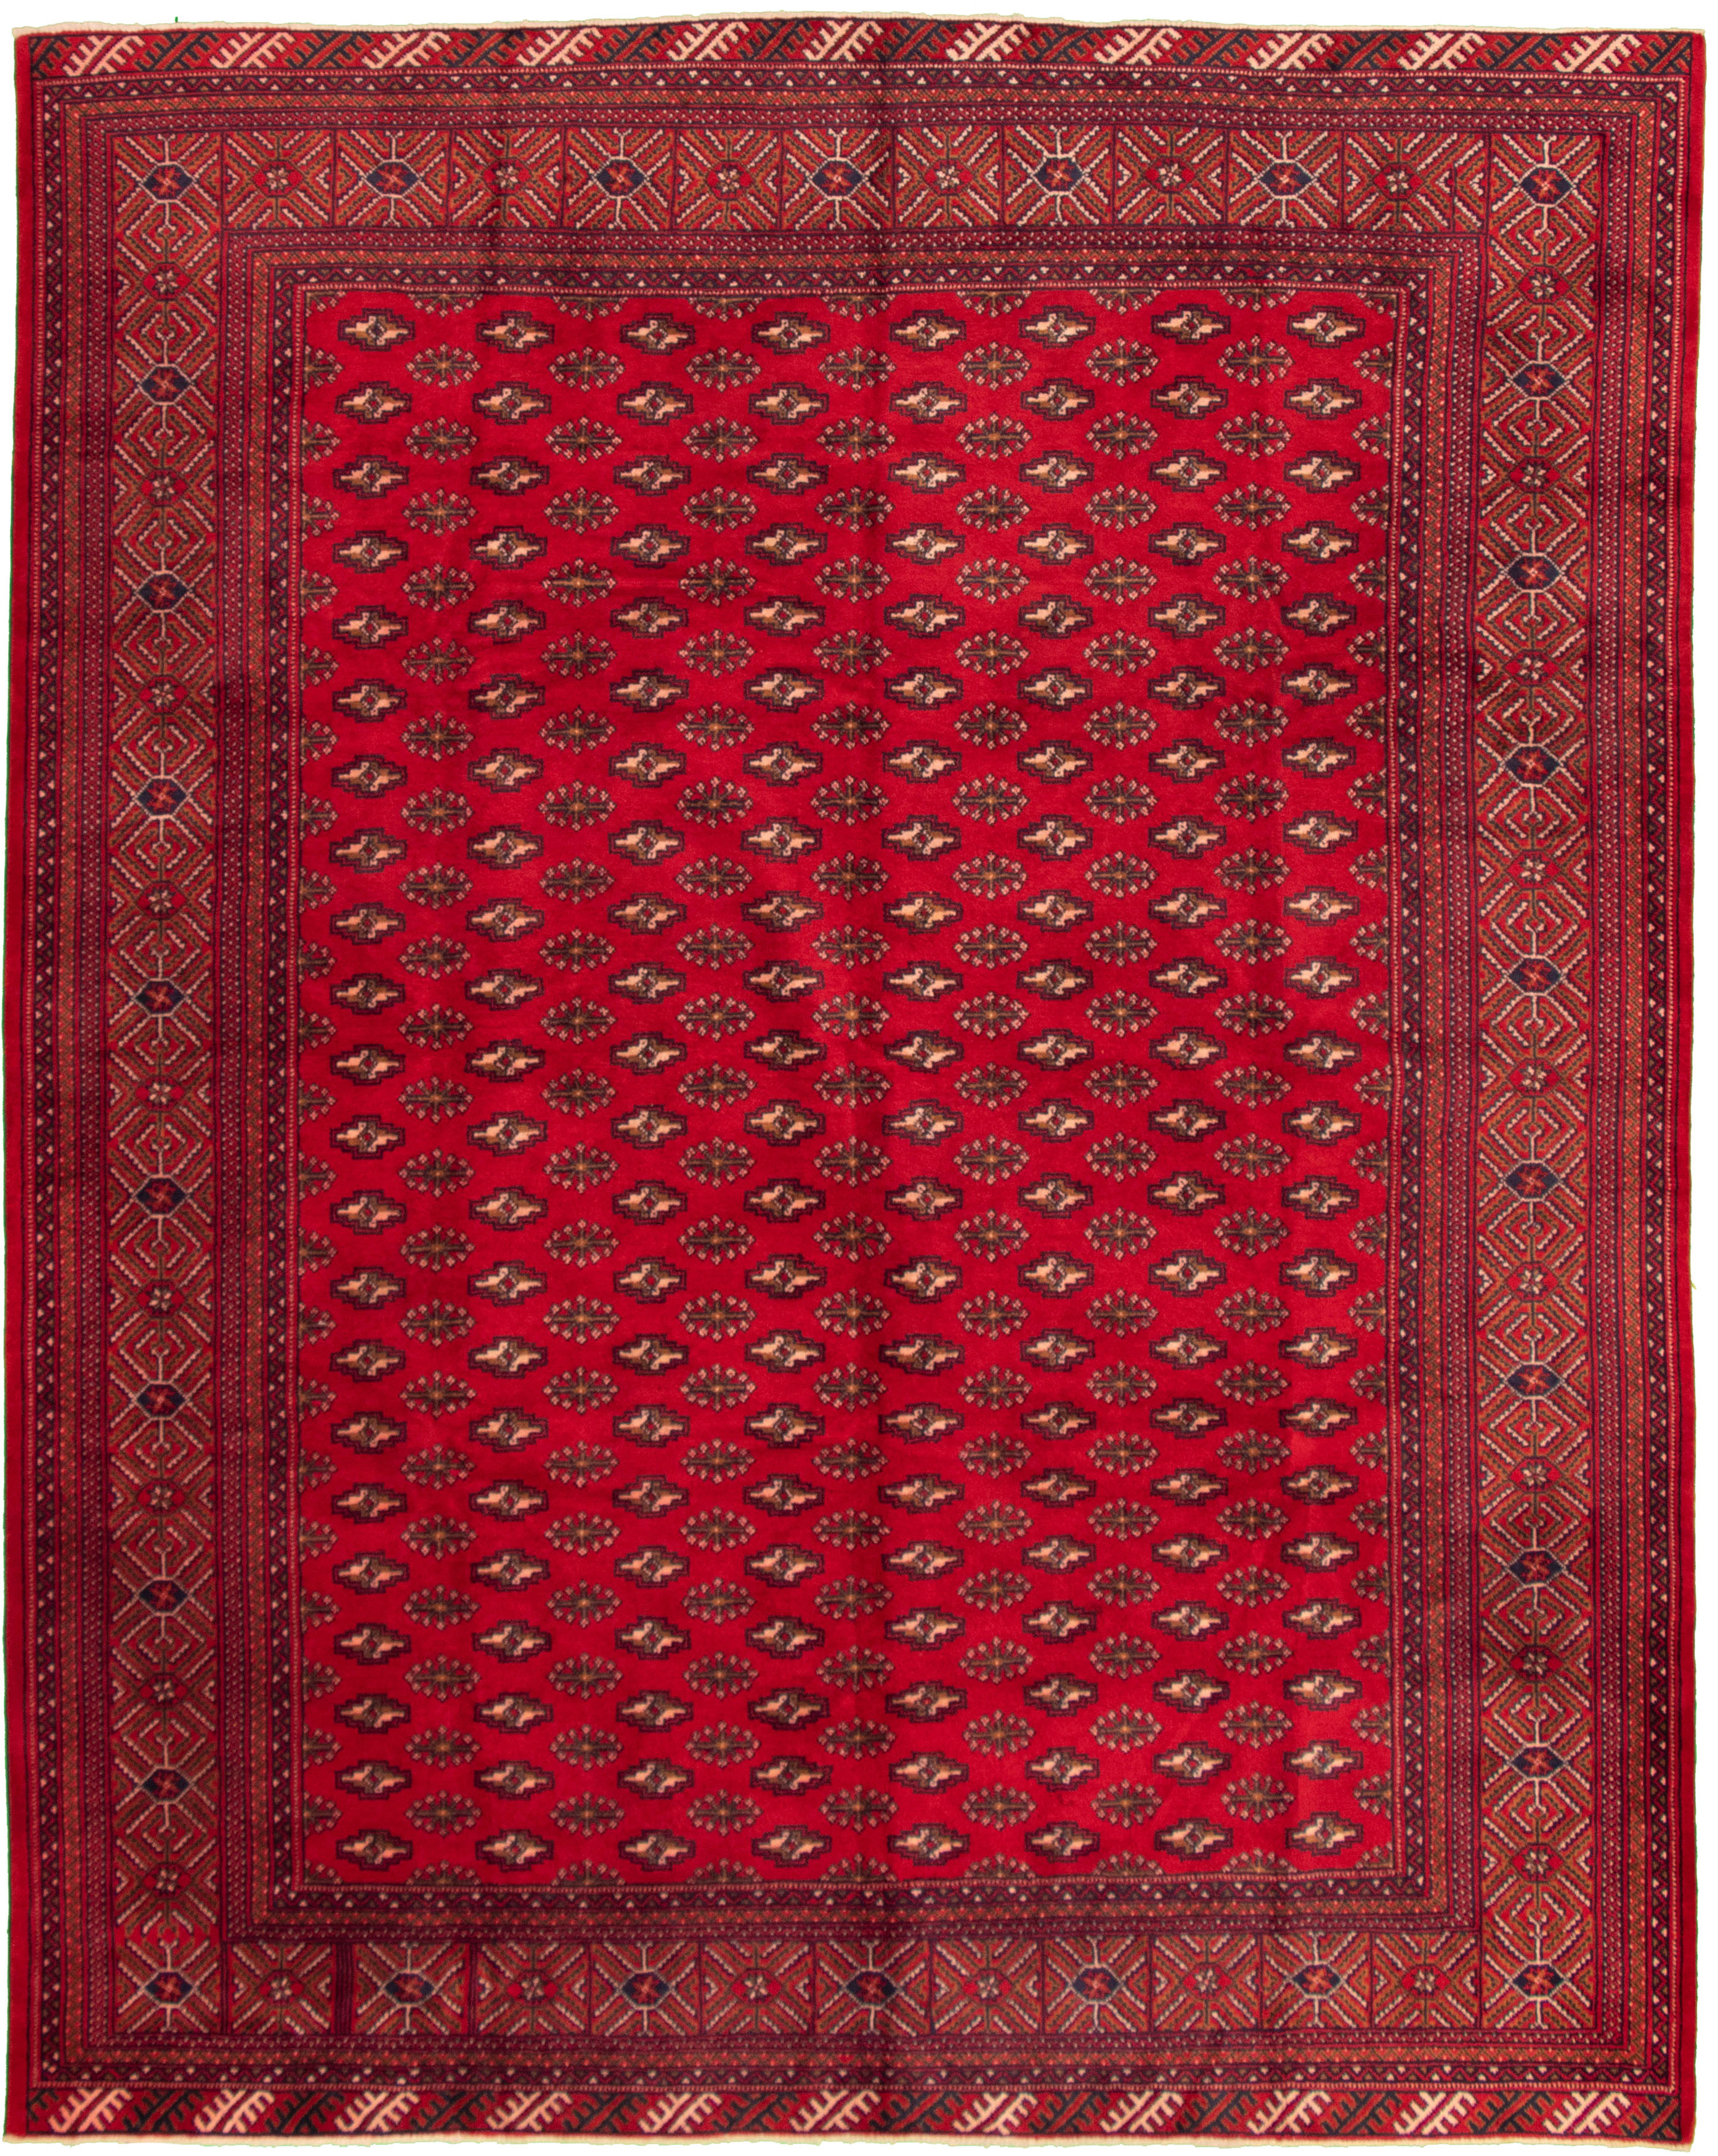 Hand-knotted Khal Mohammadi Red Wool Rug 8'2" x 10'11" Size: 8'2" x 10'11"  